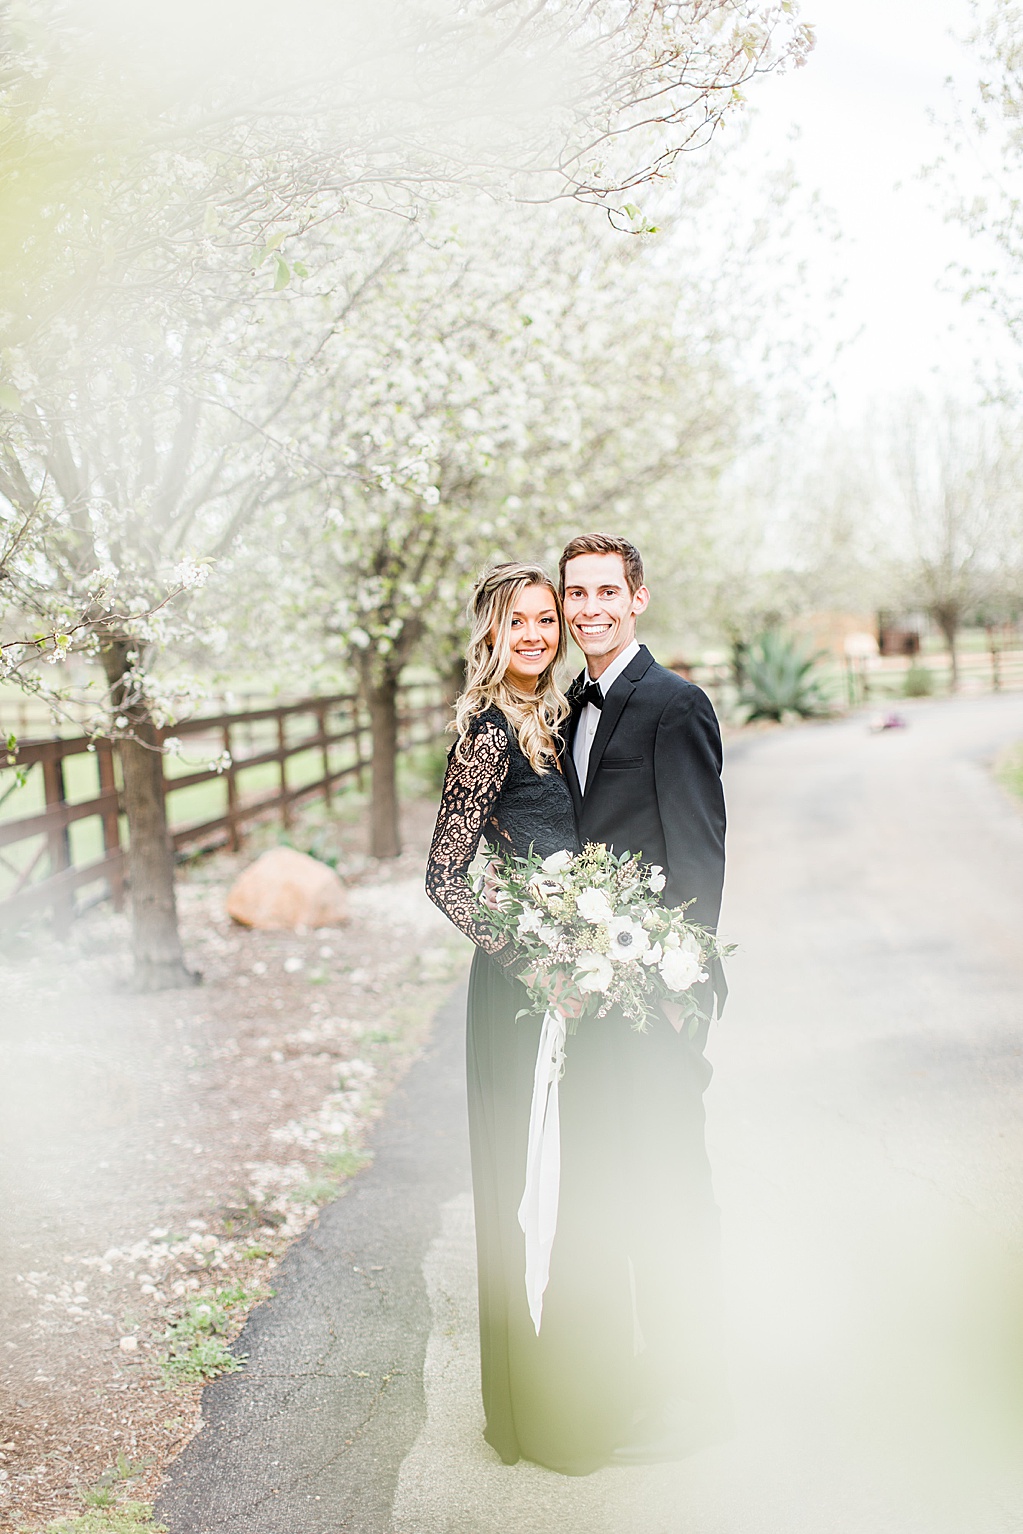 King River Ranch Wedding Venue in Johnson City Engagement Photos in the white Pear blossoms by Allison Jeffers Wedding Photography 0011